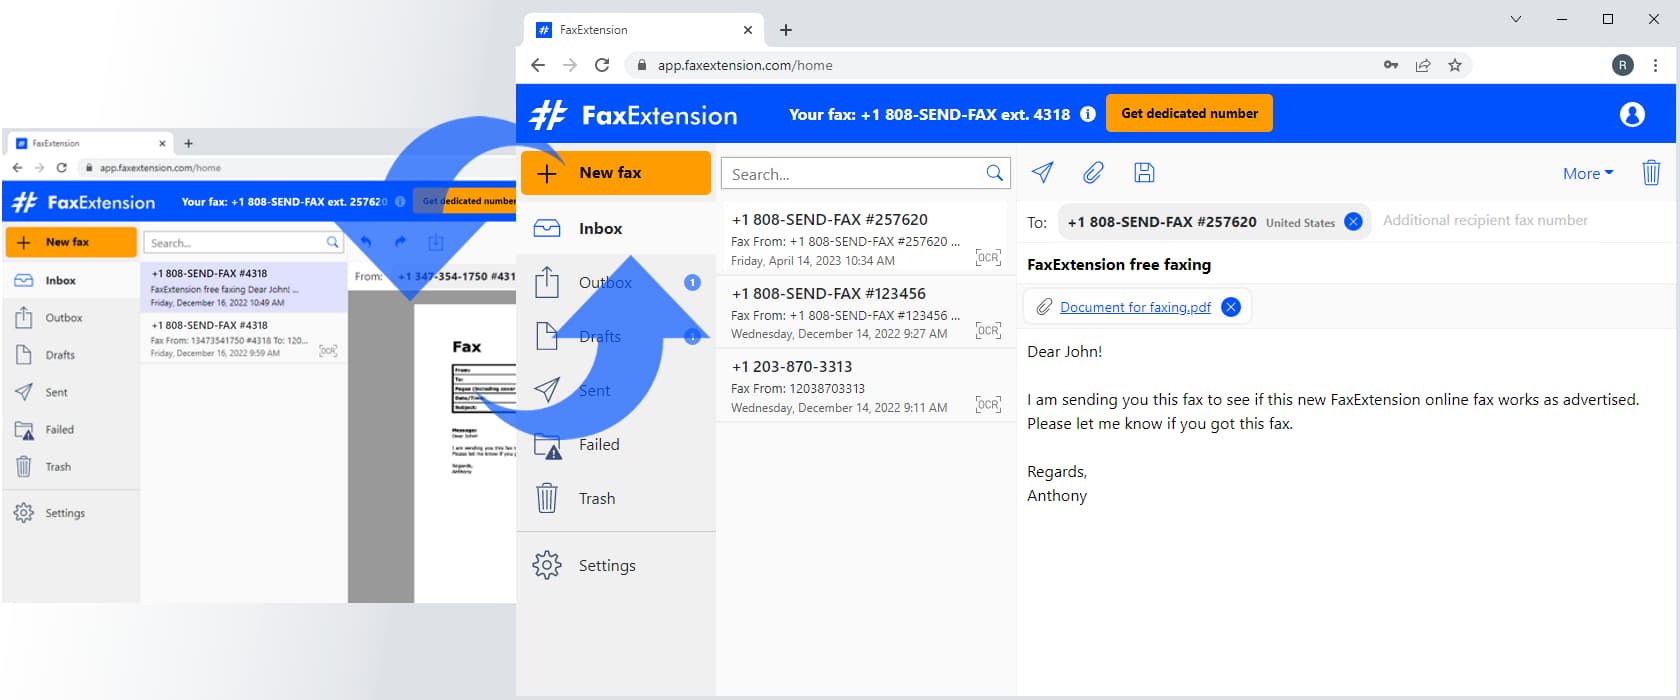 FaxExtension business fax software